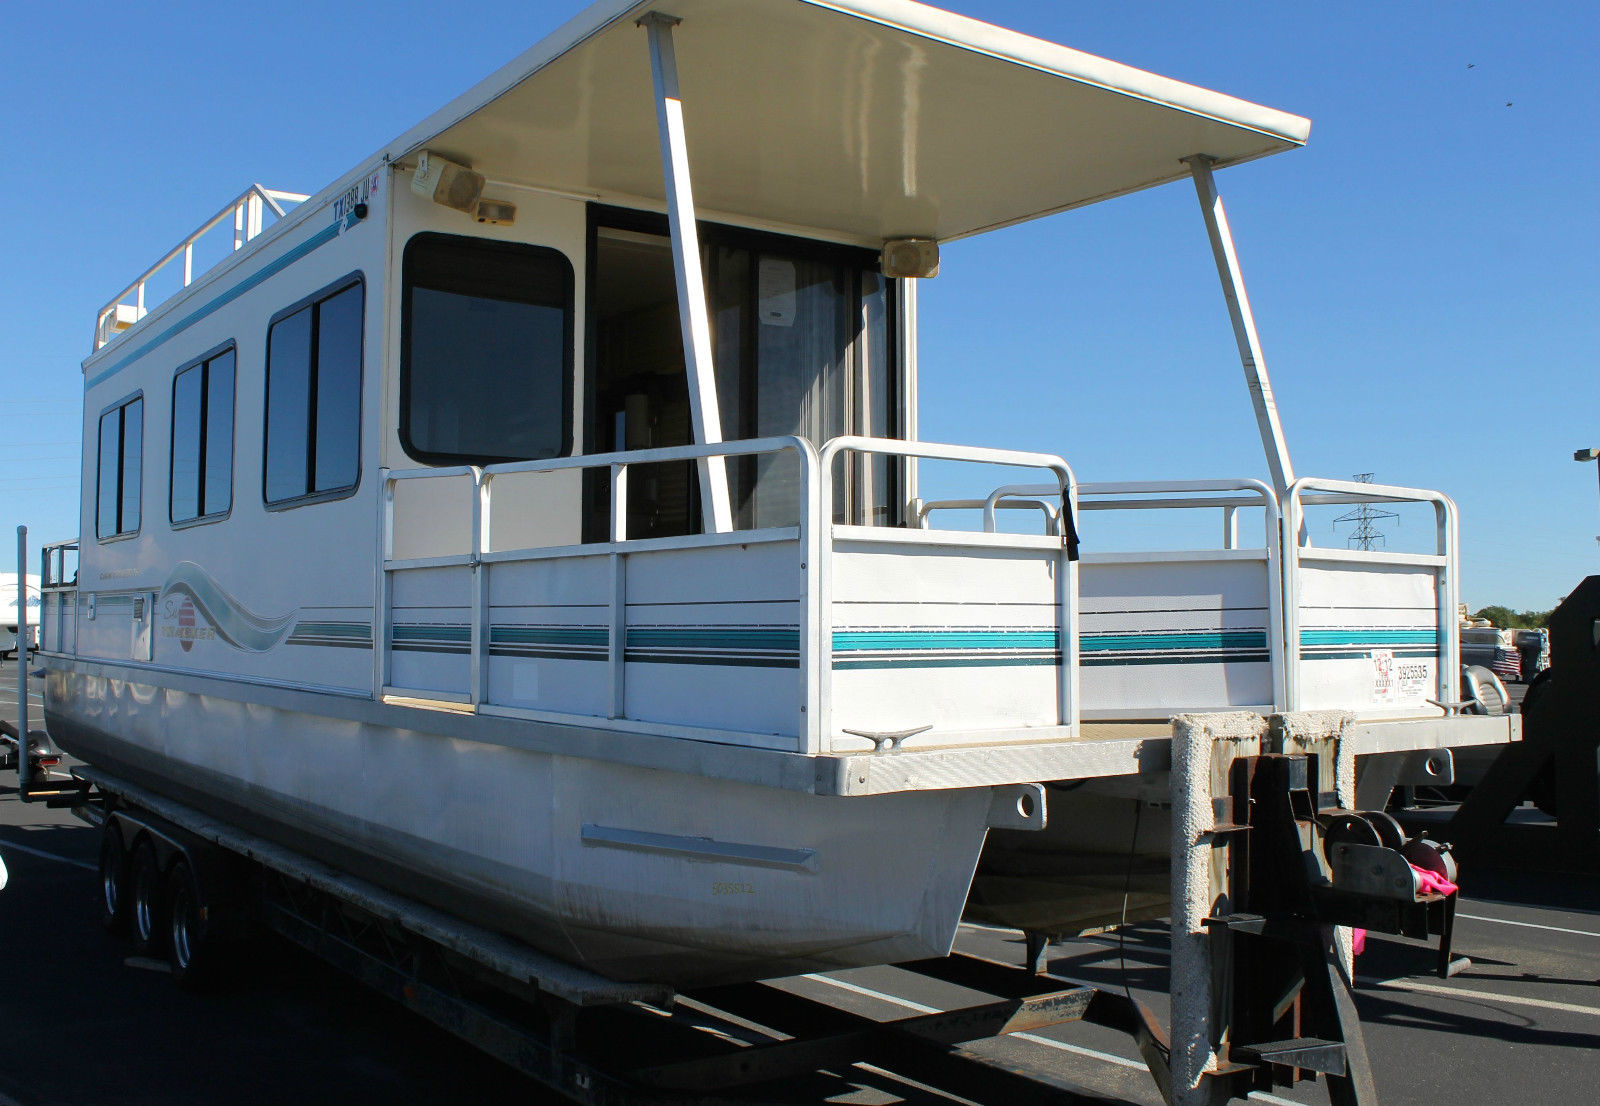 Tracker 35 CABIN CRUISER 1996 for sale for $100 - Boats ...